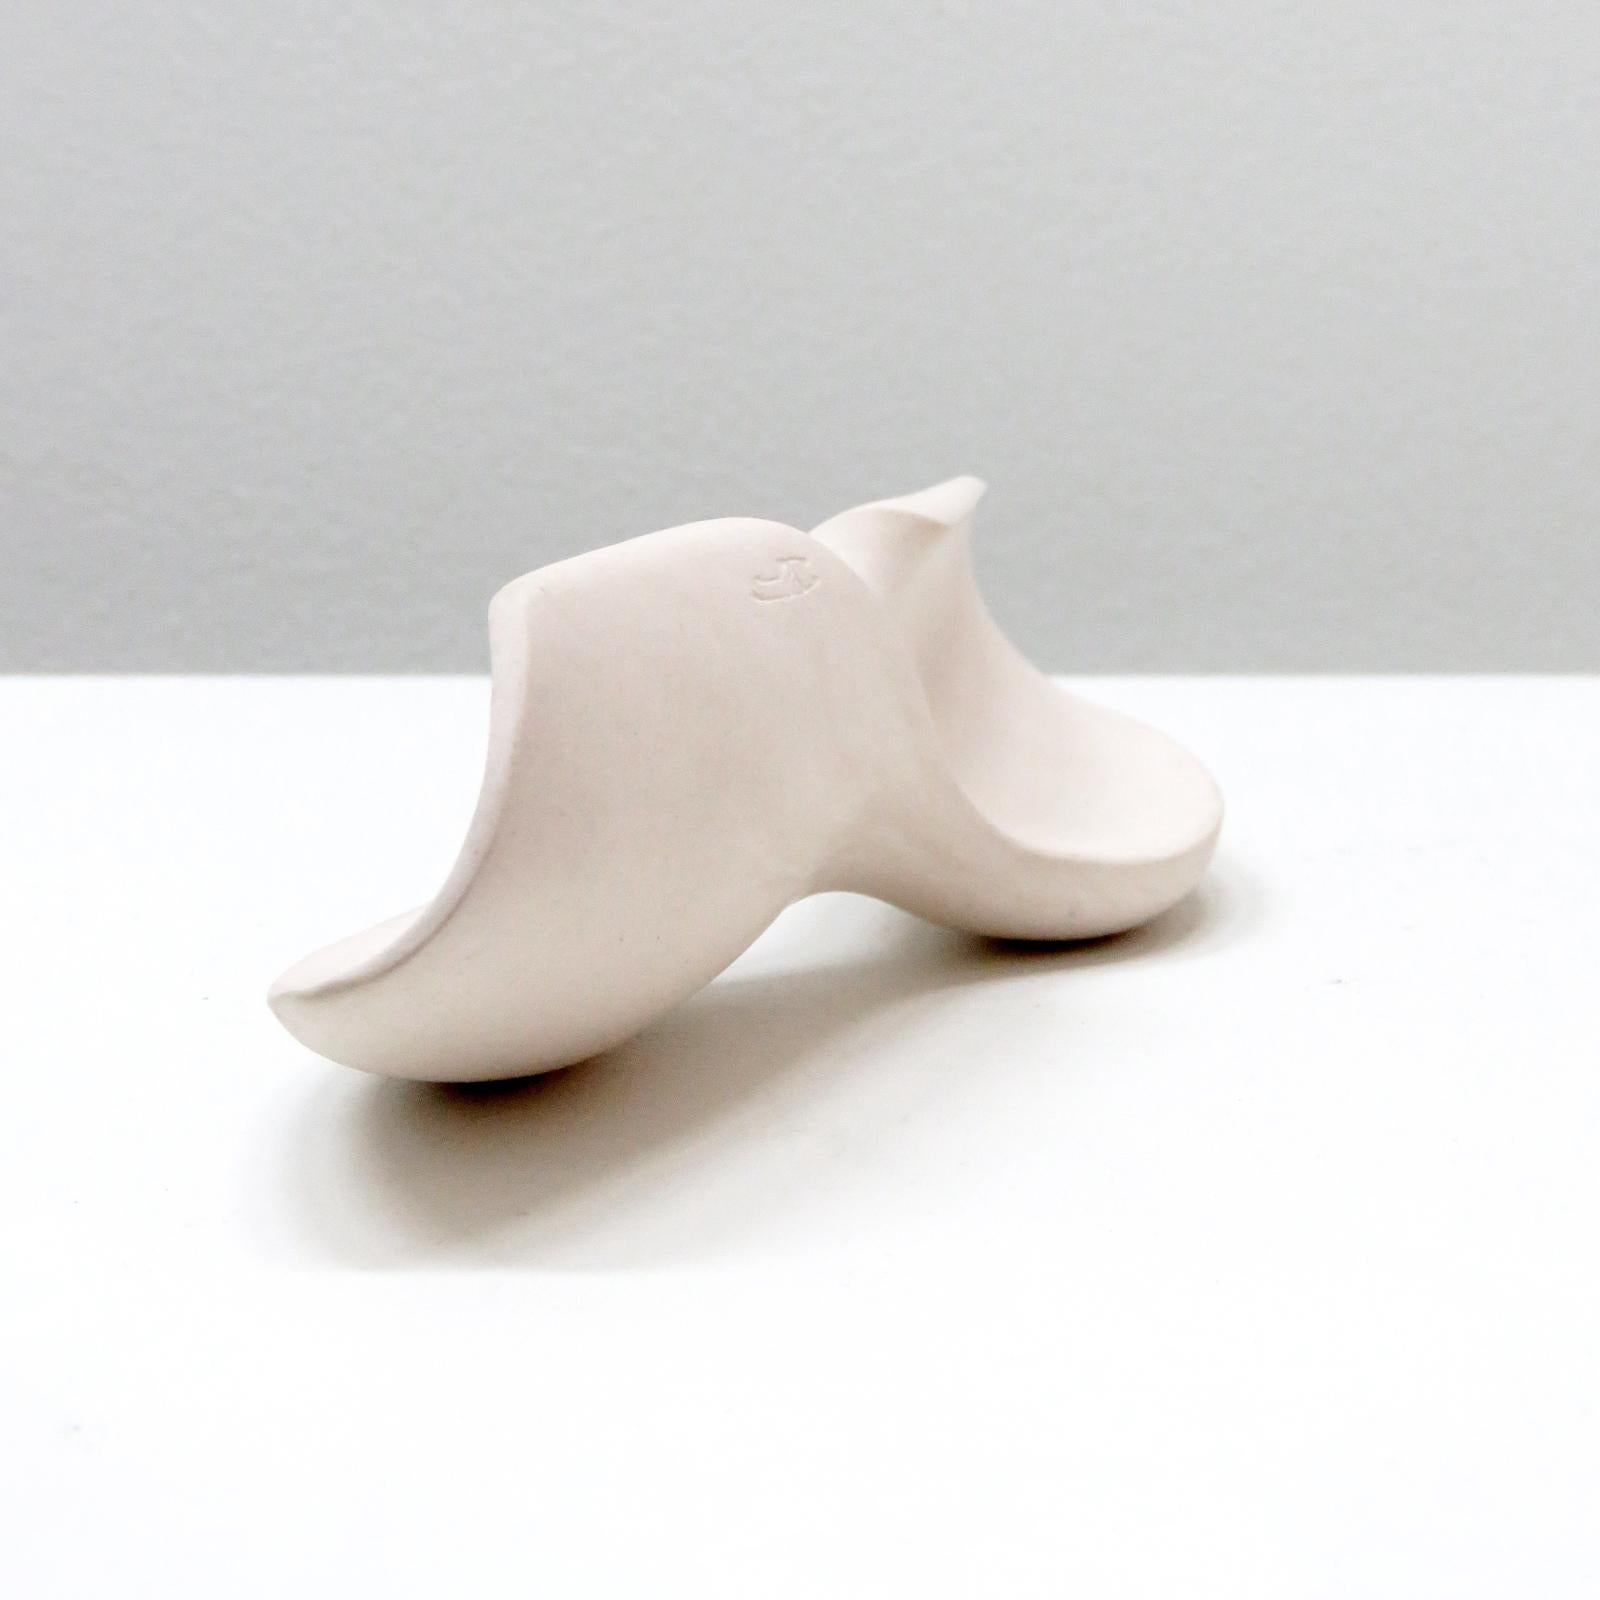 Ceramic Sculptural Palmstone 'Propeller' by Jed Farlow  For Sale